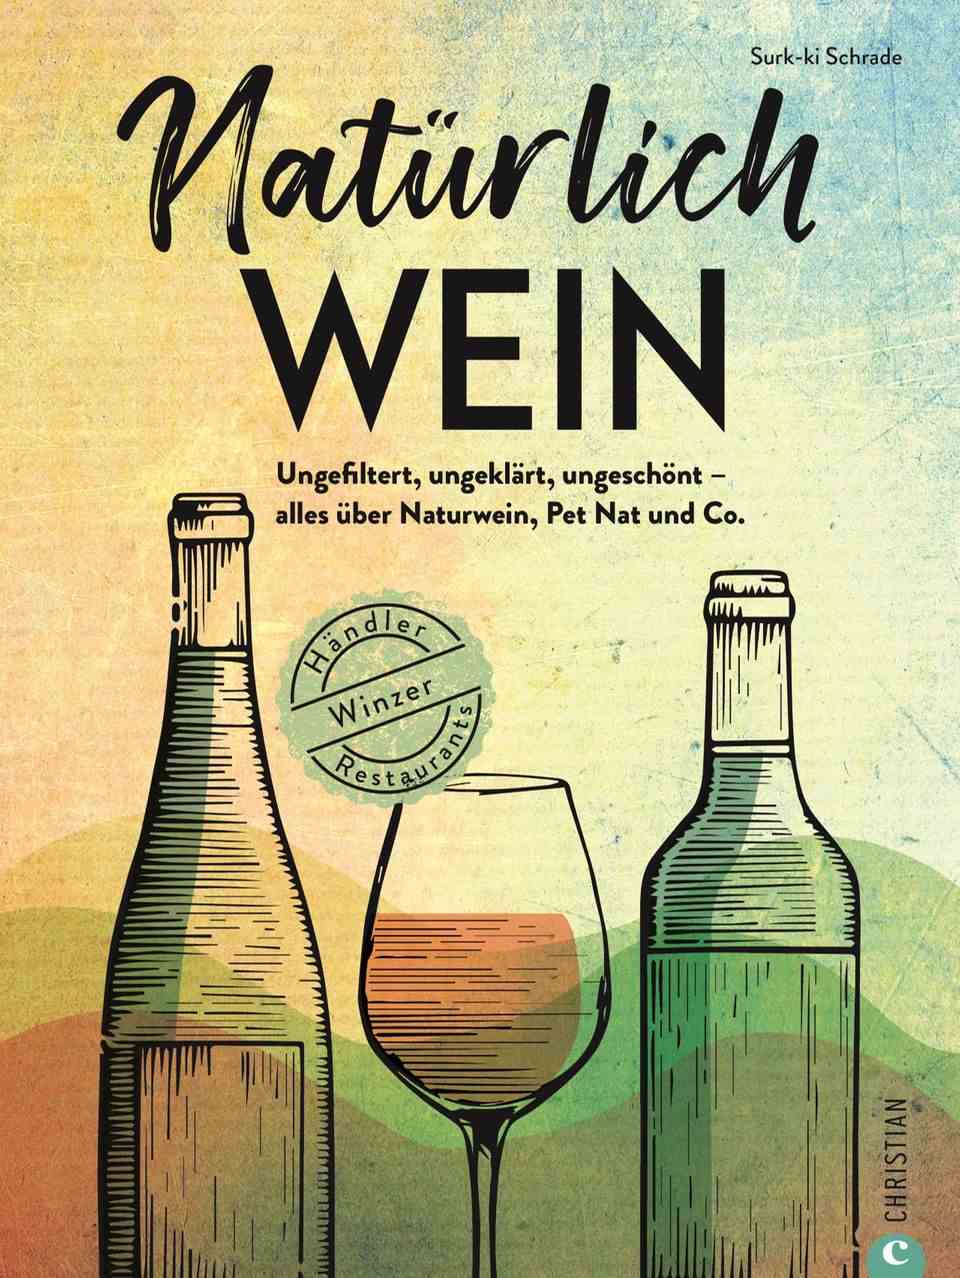 You can find more about natural wine and the differences to conventional wine here: "Of course wine" by Surk-ki Schrade.  Published by Christian Verlag.  192 pages.  24.99 euros.